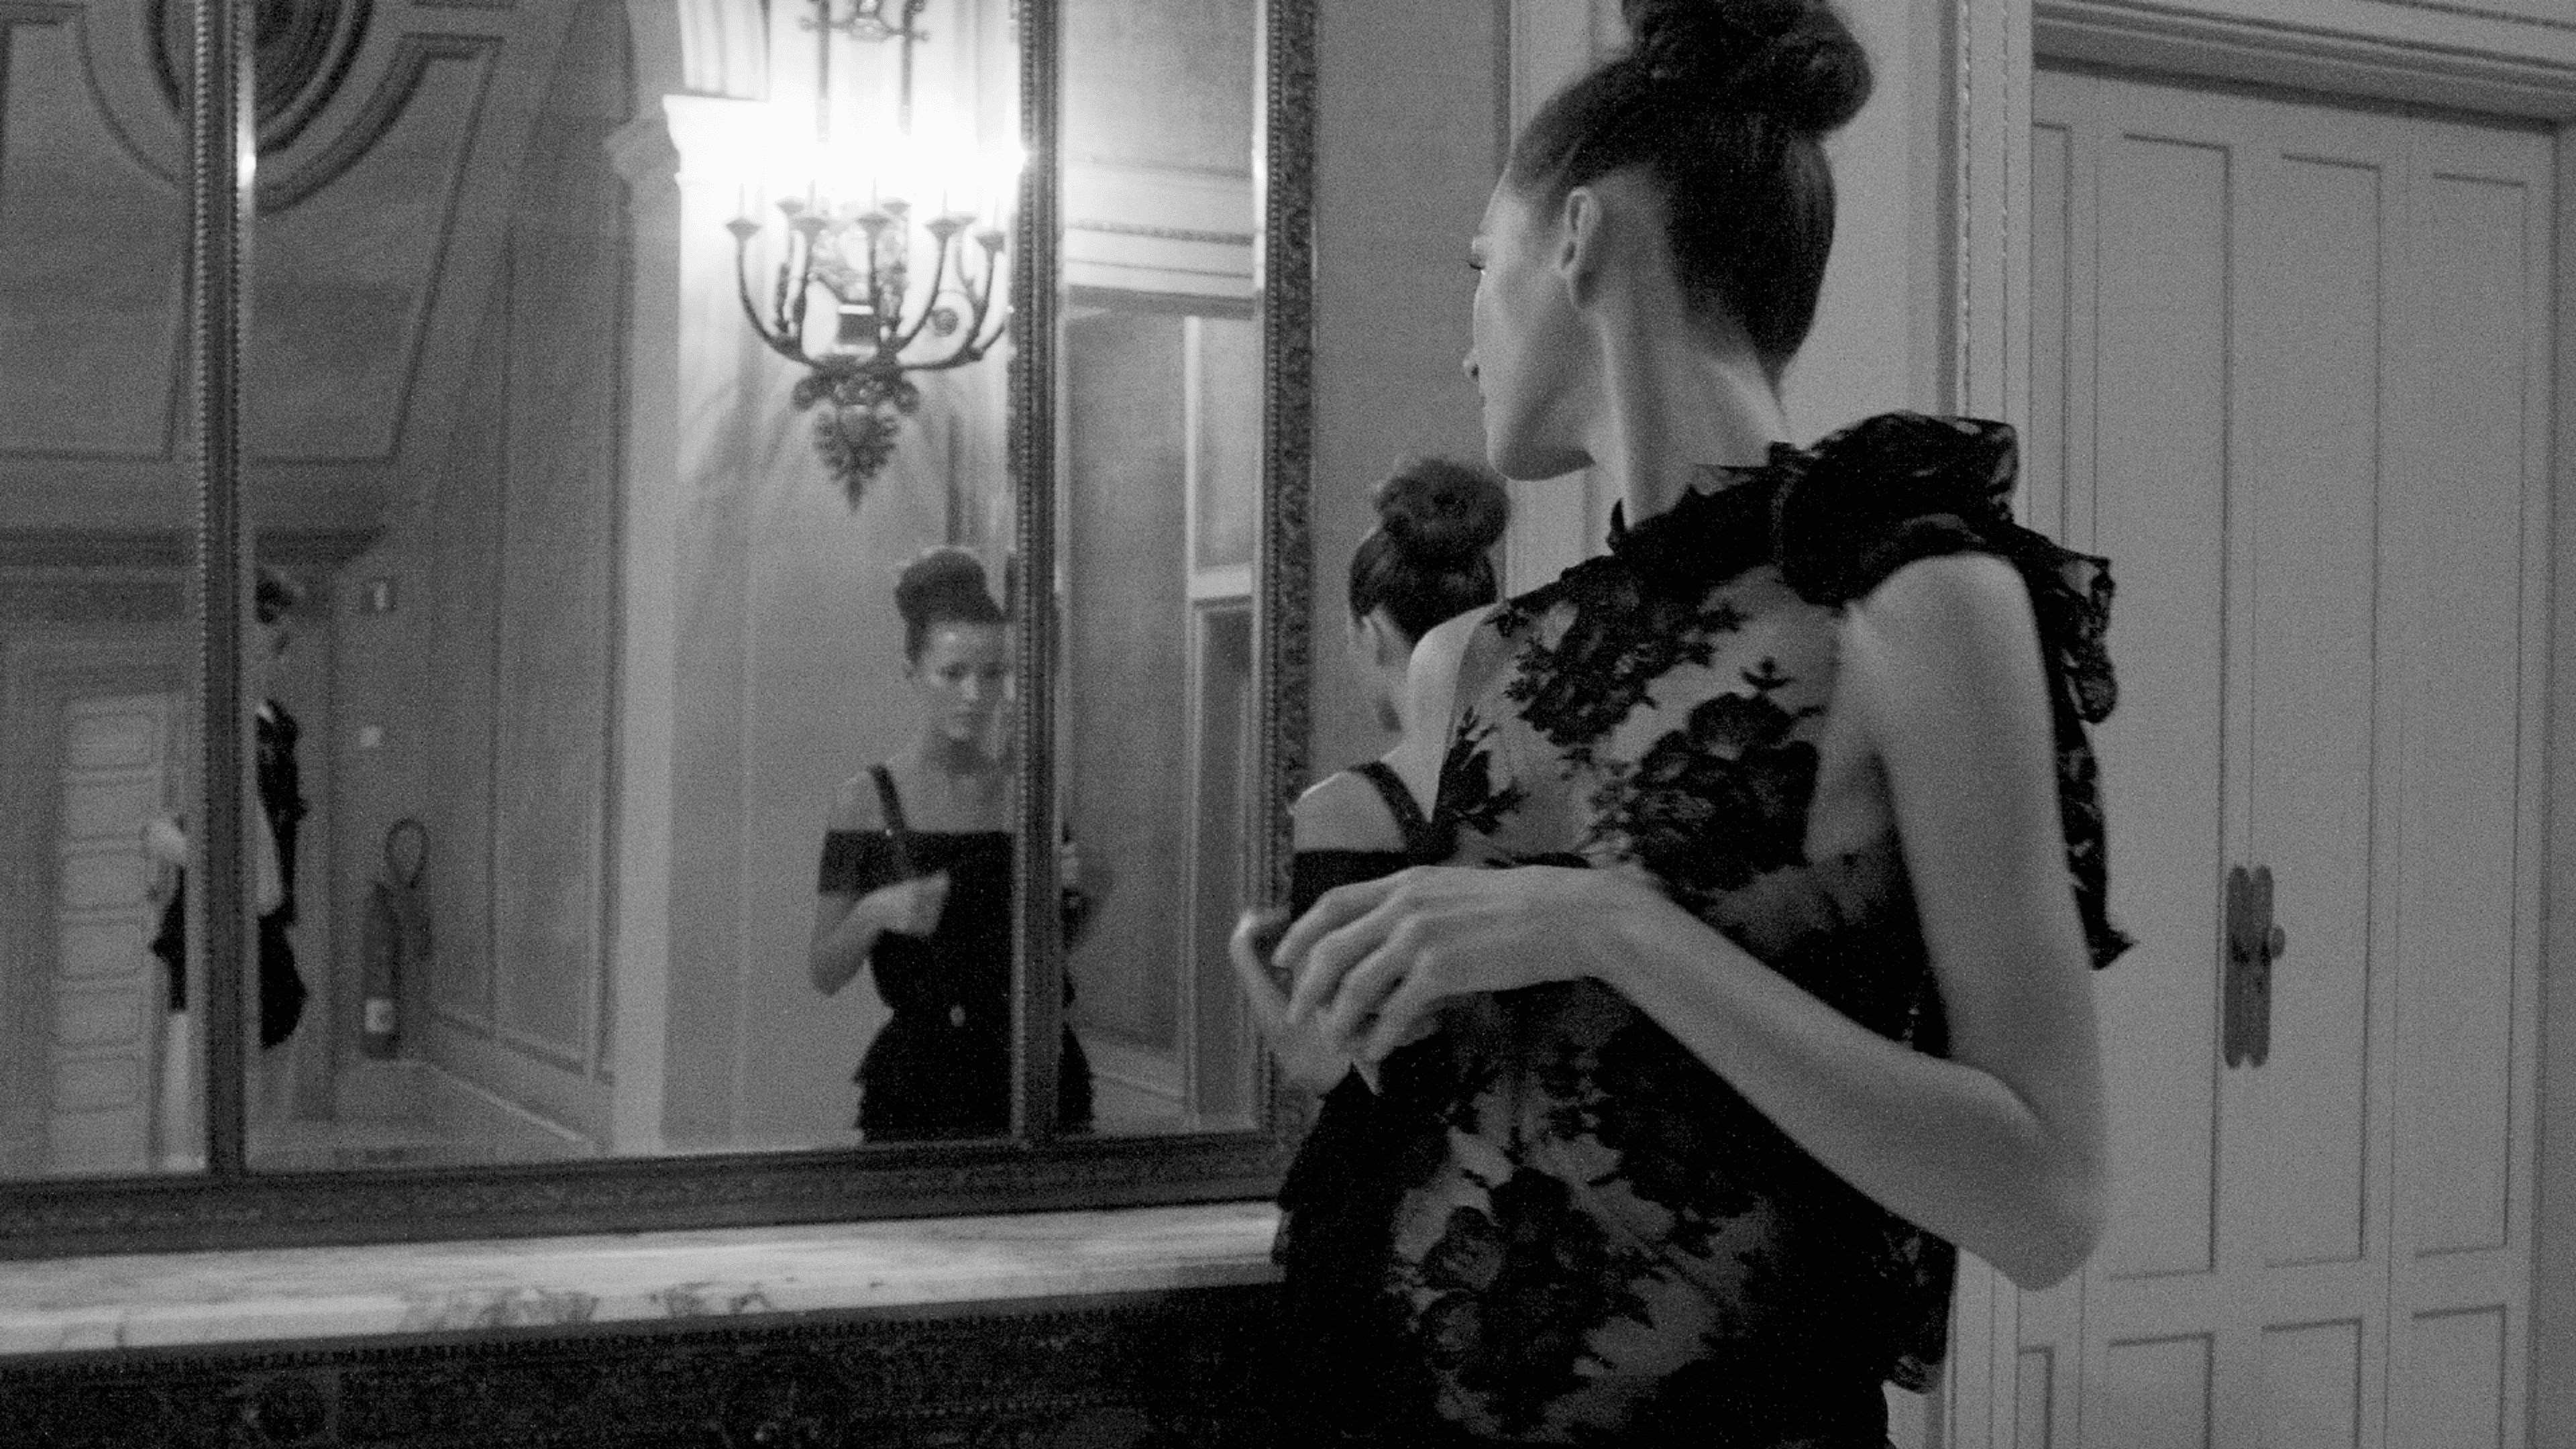 A woman in a sophisticated black evening gown admires her reflection in a grand mirror, capturing a moment of classic elegance.